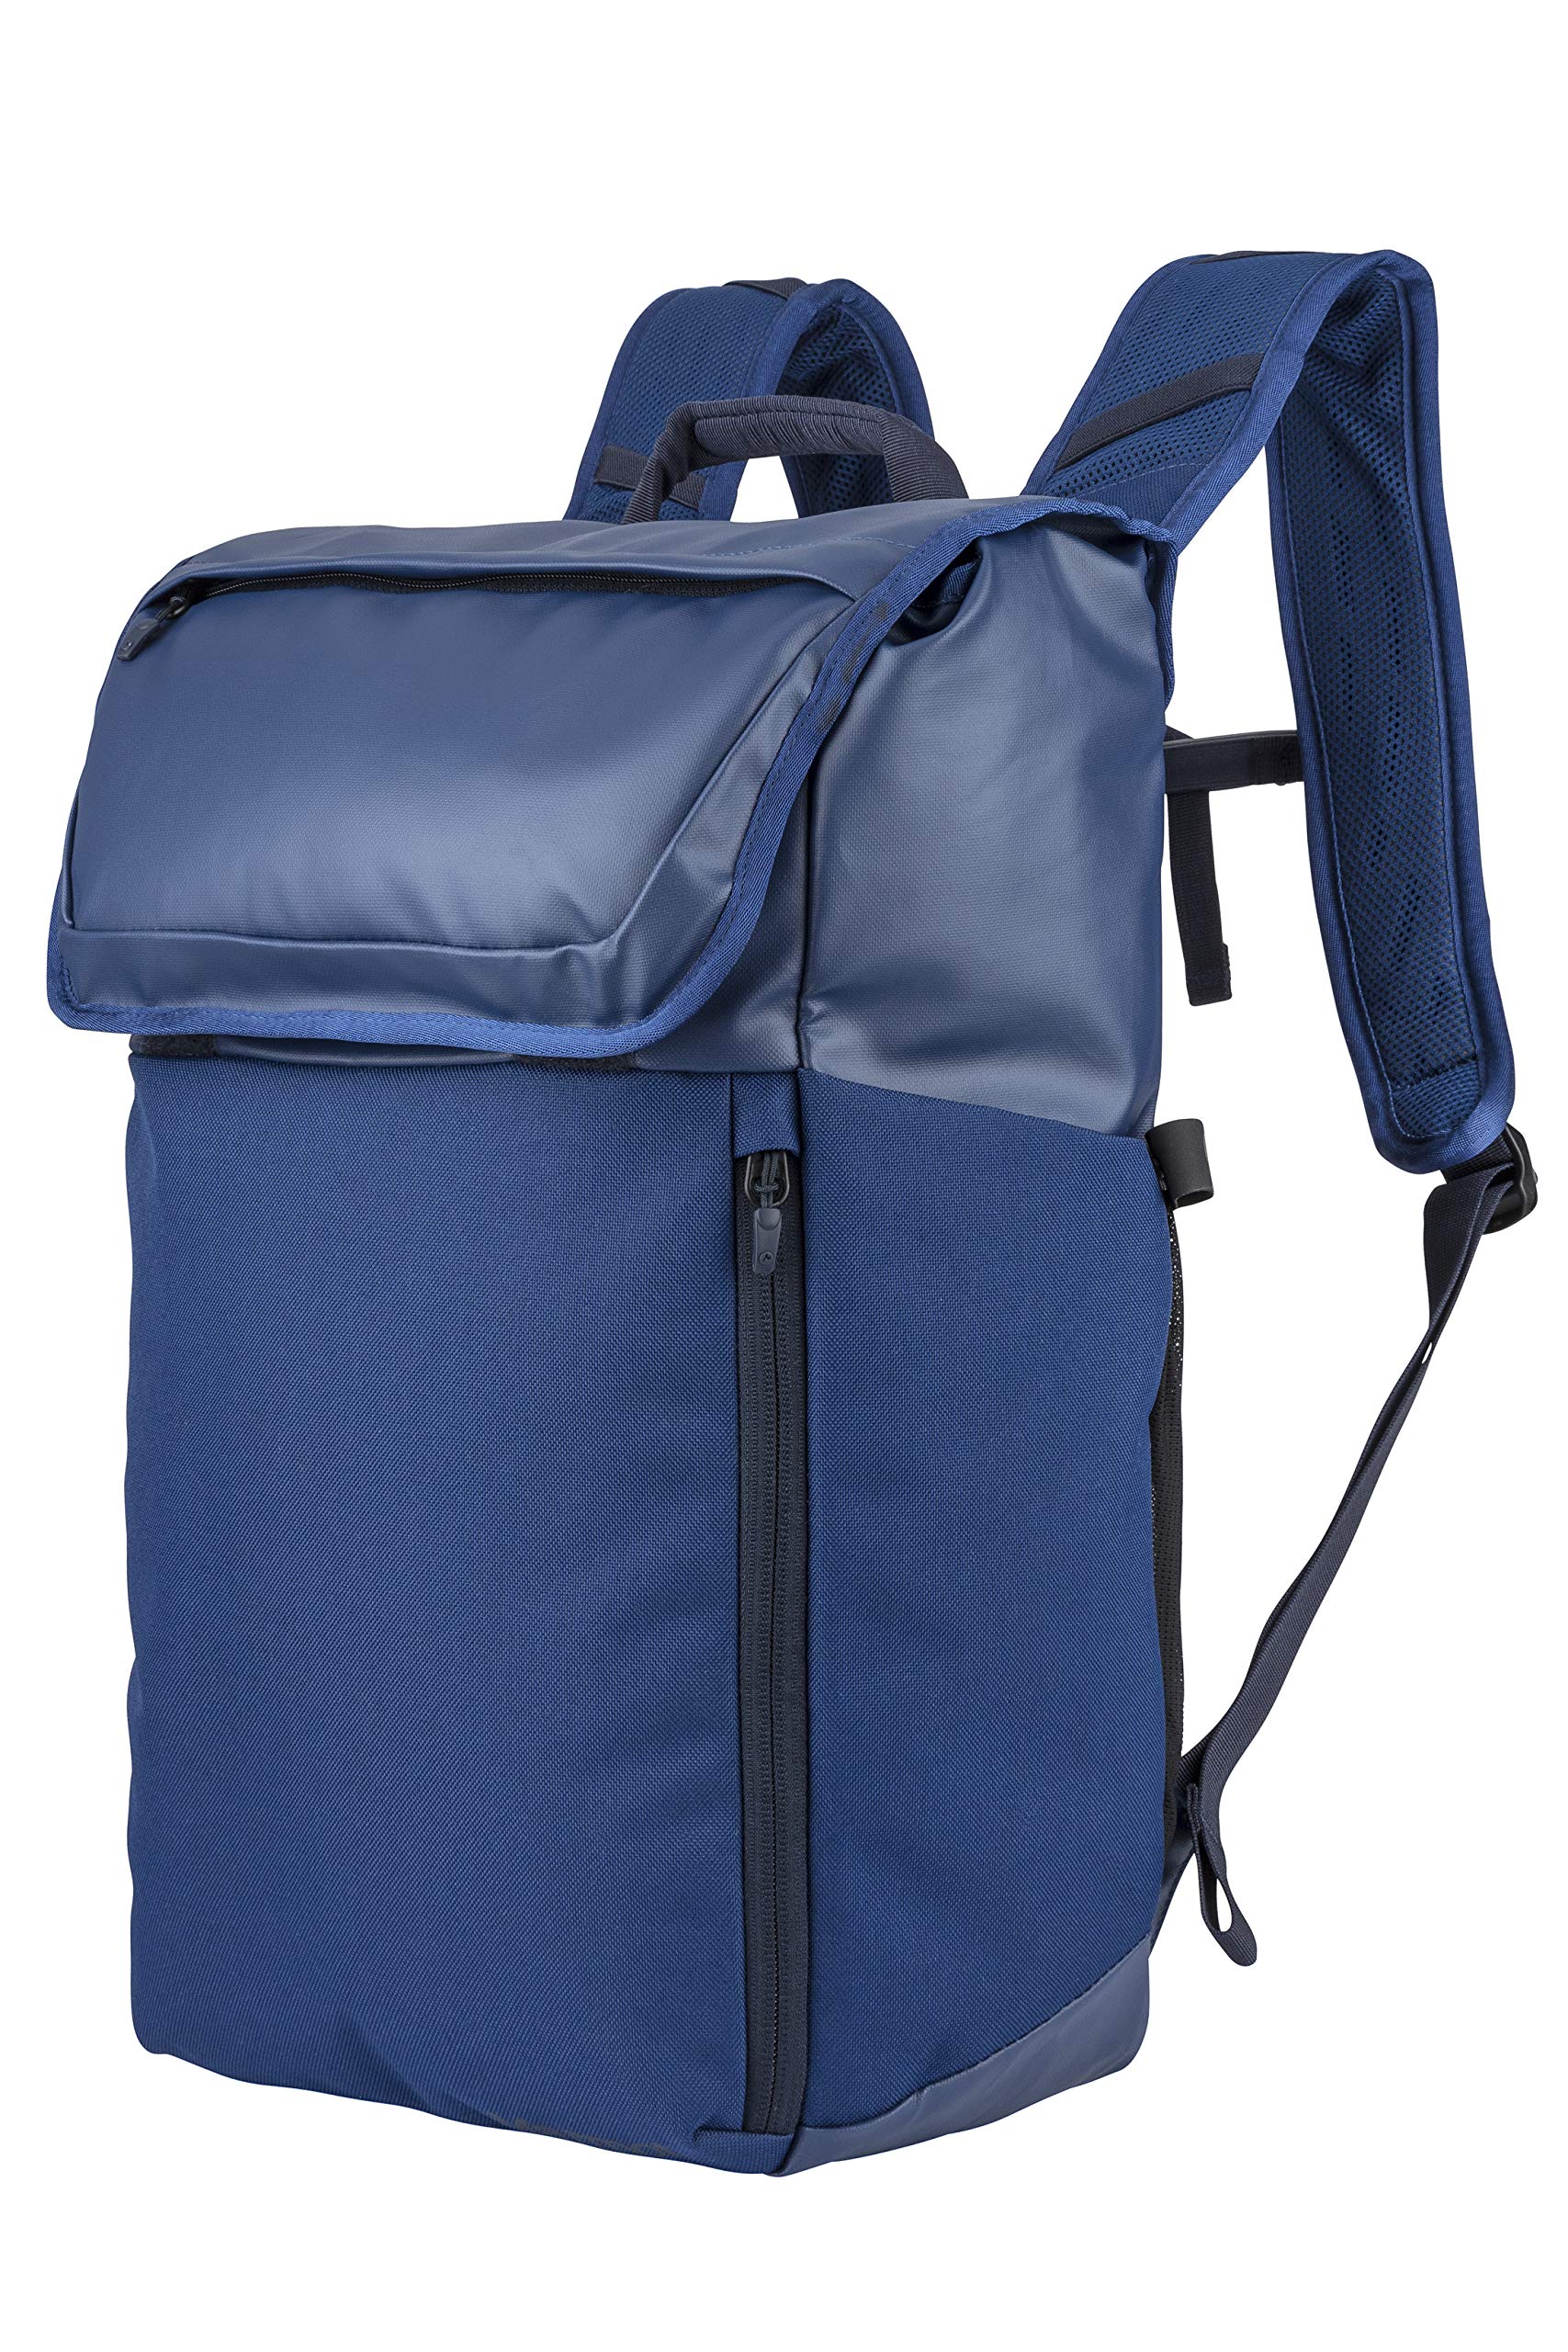 Marmot Slate Everyday Travel Water-Resistant Backpack (Estate Blue/Total Eclipse) $28.16 + Free Shipping